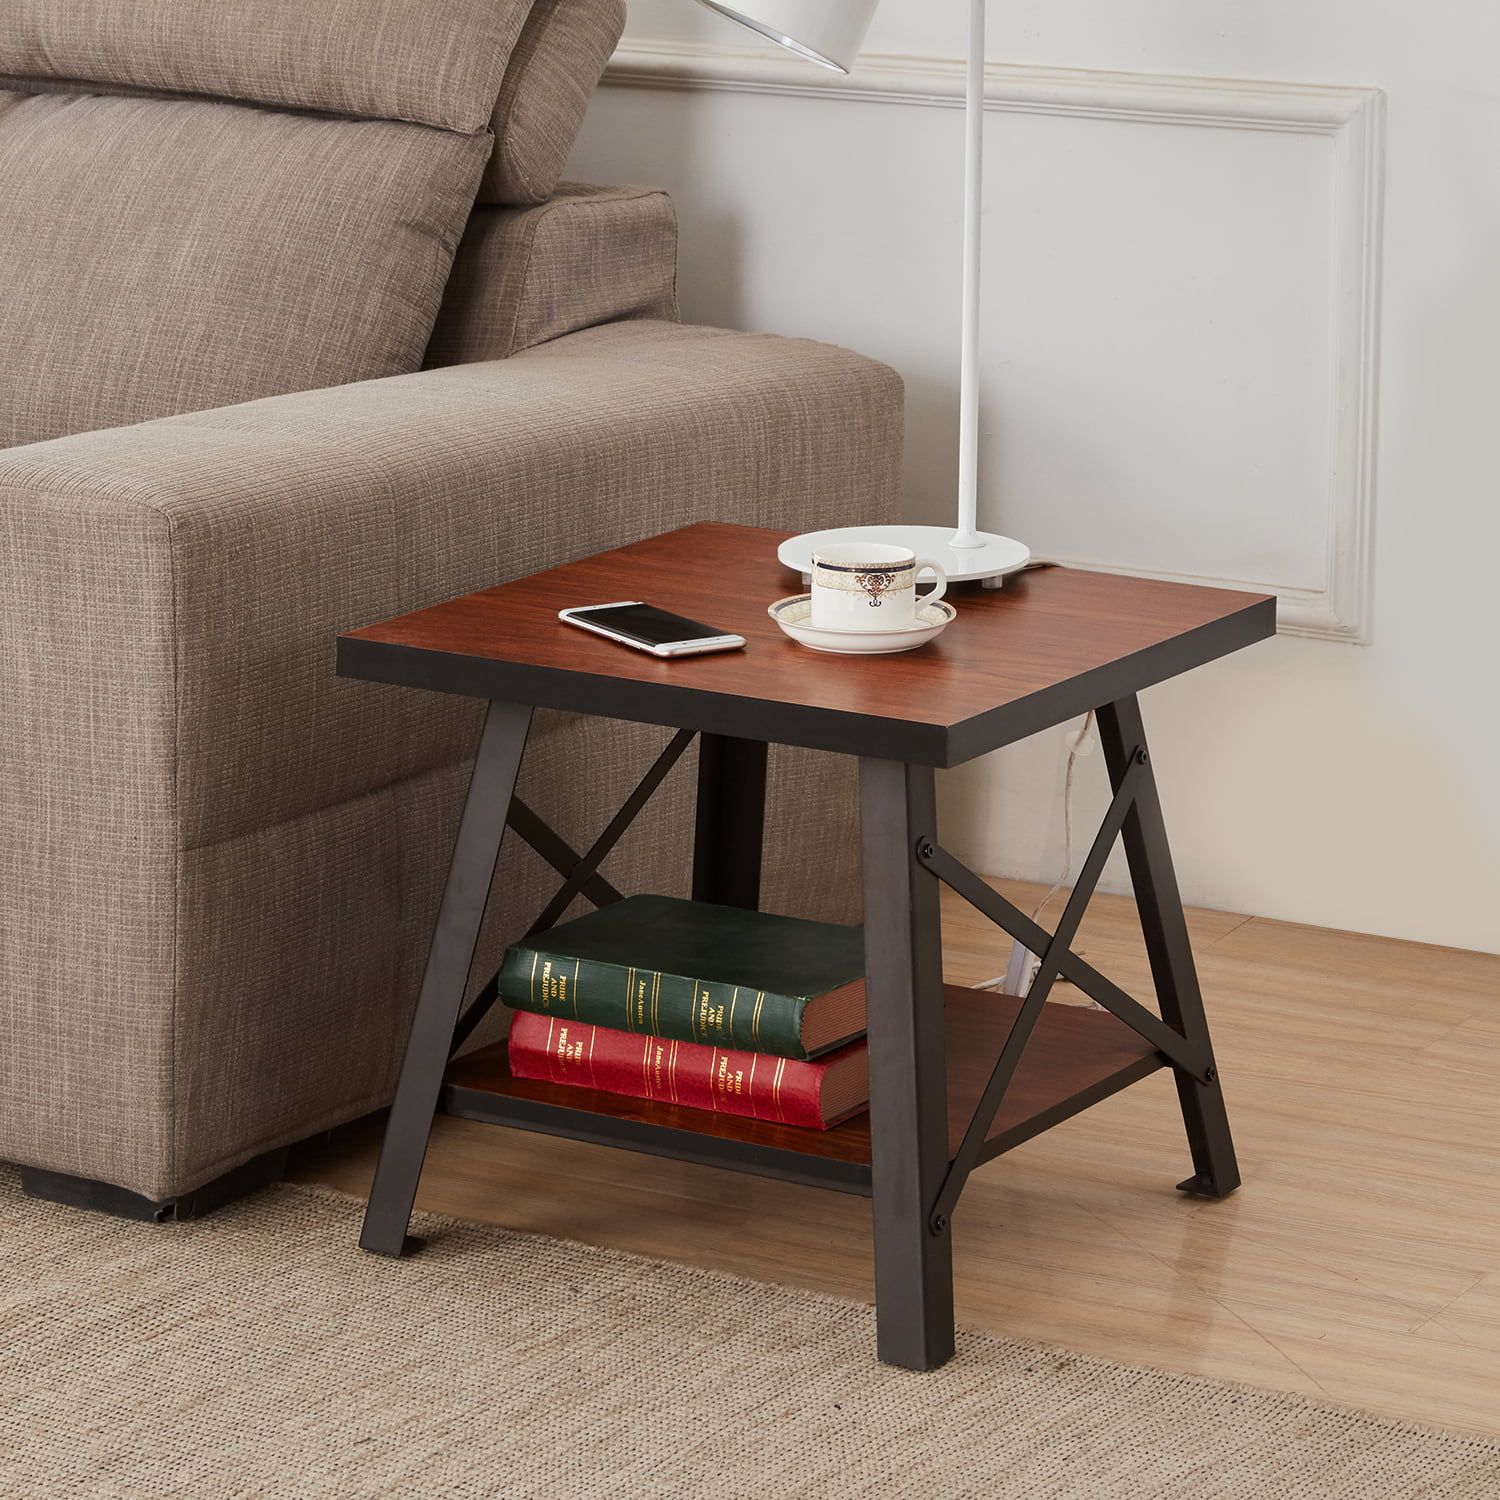 20" Open Storage Shelf Coffee Table End Table Square,industrial Style With Regard To Coffee Tables With Metal Legs (View 15 of 15)